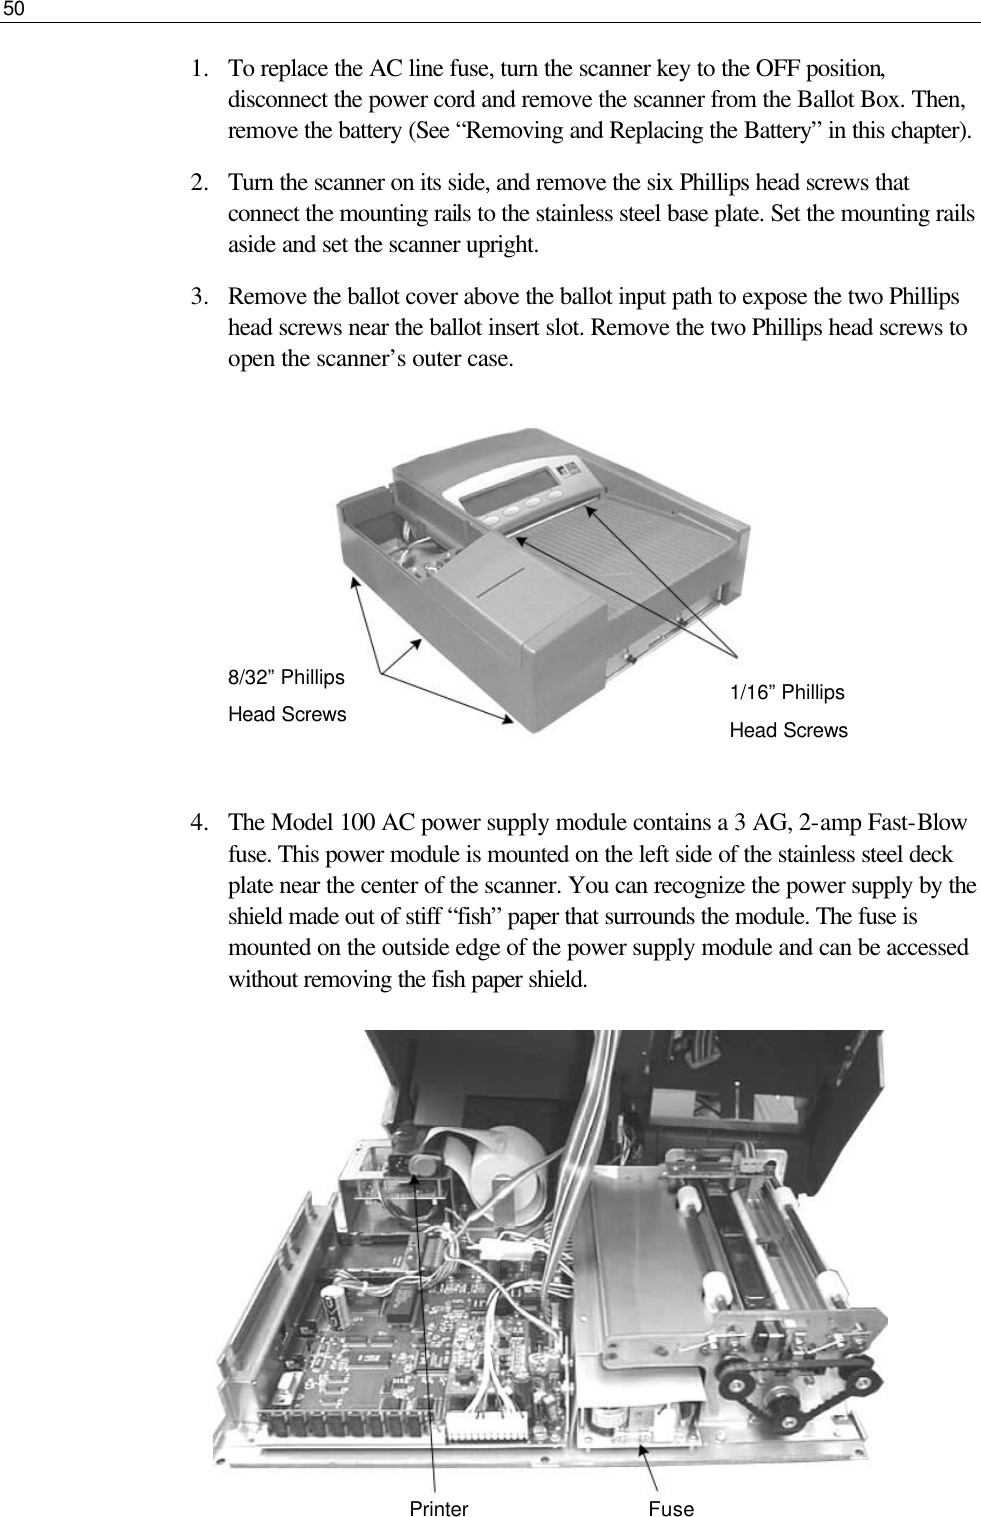 50  1.  To replace the AC line fuse, turn the scanner key to the OFF position, disconnect the power cord and remove the scanner from the Ballot Box. Then, remove the battery (See “Removing and Replacing the Battery” in this chapter). 2.  Turn the scanner on its side, and remove the six Phillips head screws that connect the mounting rails to the stainless steel base plate. Set the mounting rails aside and set the scanner upright. 3.  Remove the ballot cover above the ballot input path to expose the two Phillips head screws near the ballot insert slot. Remove the two Phillips head screws to open the scanner’s outer case.          4.  The Model 100 AC power supply module contains a 3 AG, 2-amp Fast-Blow fuse. This power module is mounted on the left side of the stainless steel deck plate near the center of the scanner. You can recognize the power supply by the shield made out of stiff “fish” paper that surrounds the module. The fuse is mounted on the outside edge of the power supply module and can be accessed without removing the fish paper shield.          1/16” Phillips Head Screws 8/32” Phillips  Head Screws  Printer Fuse 